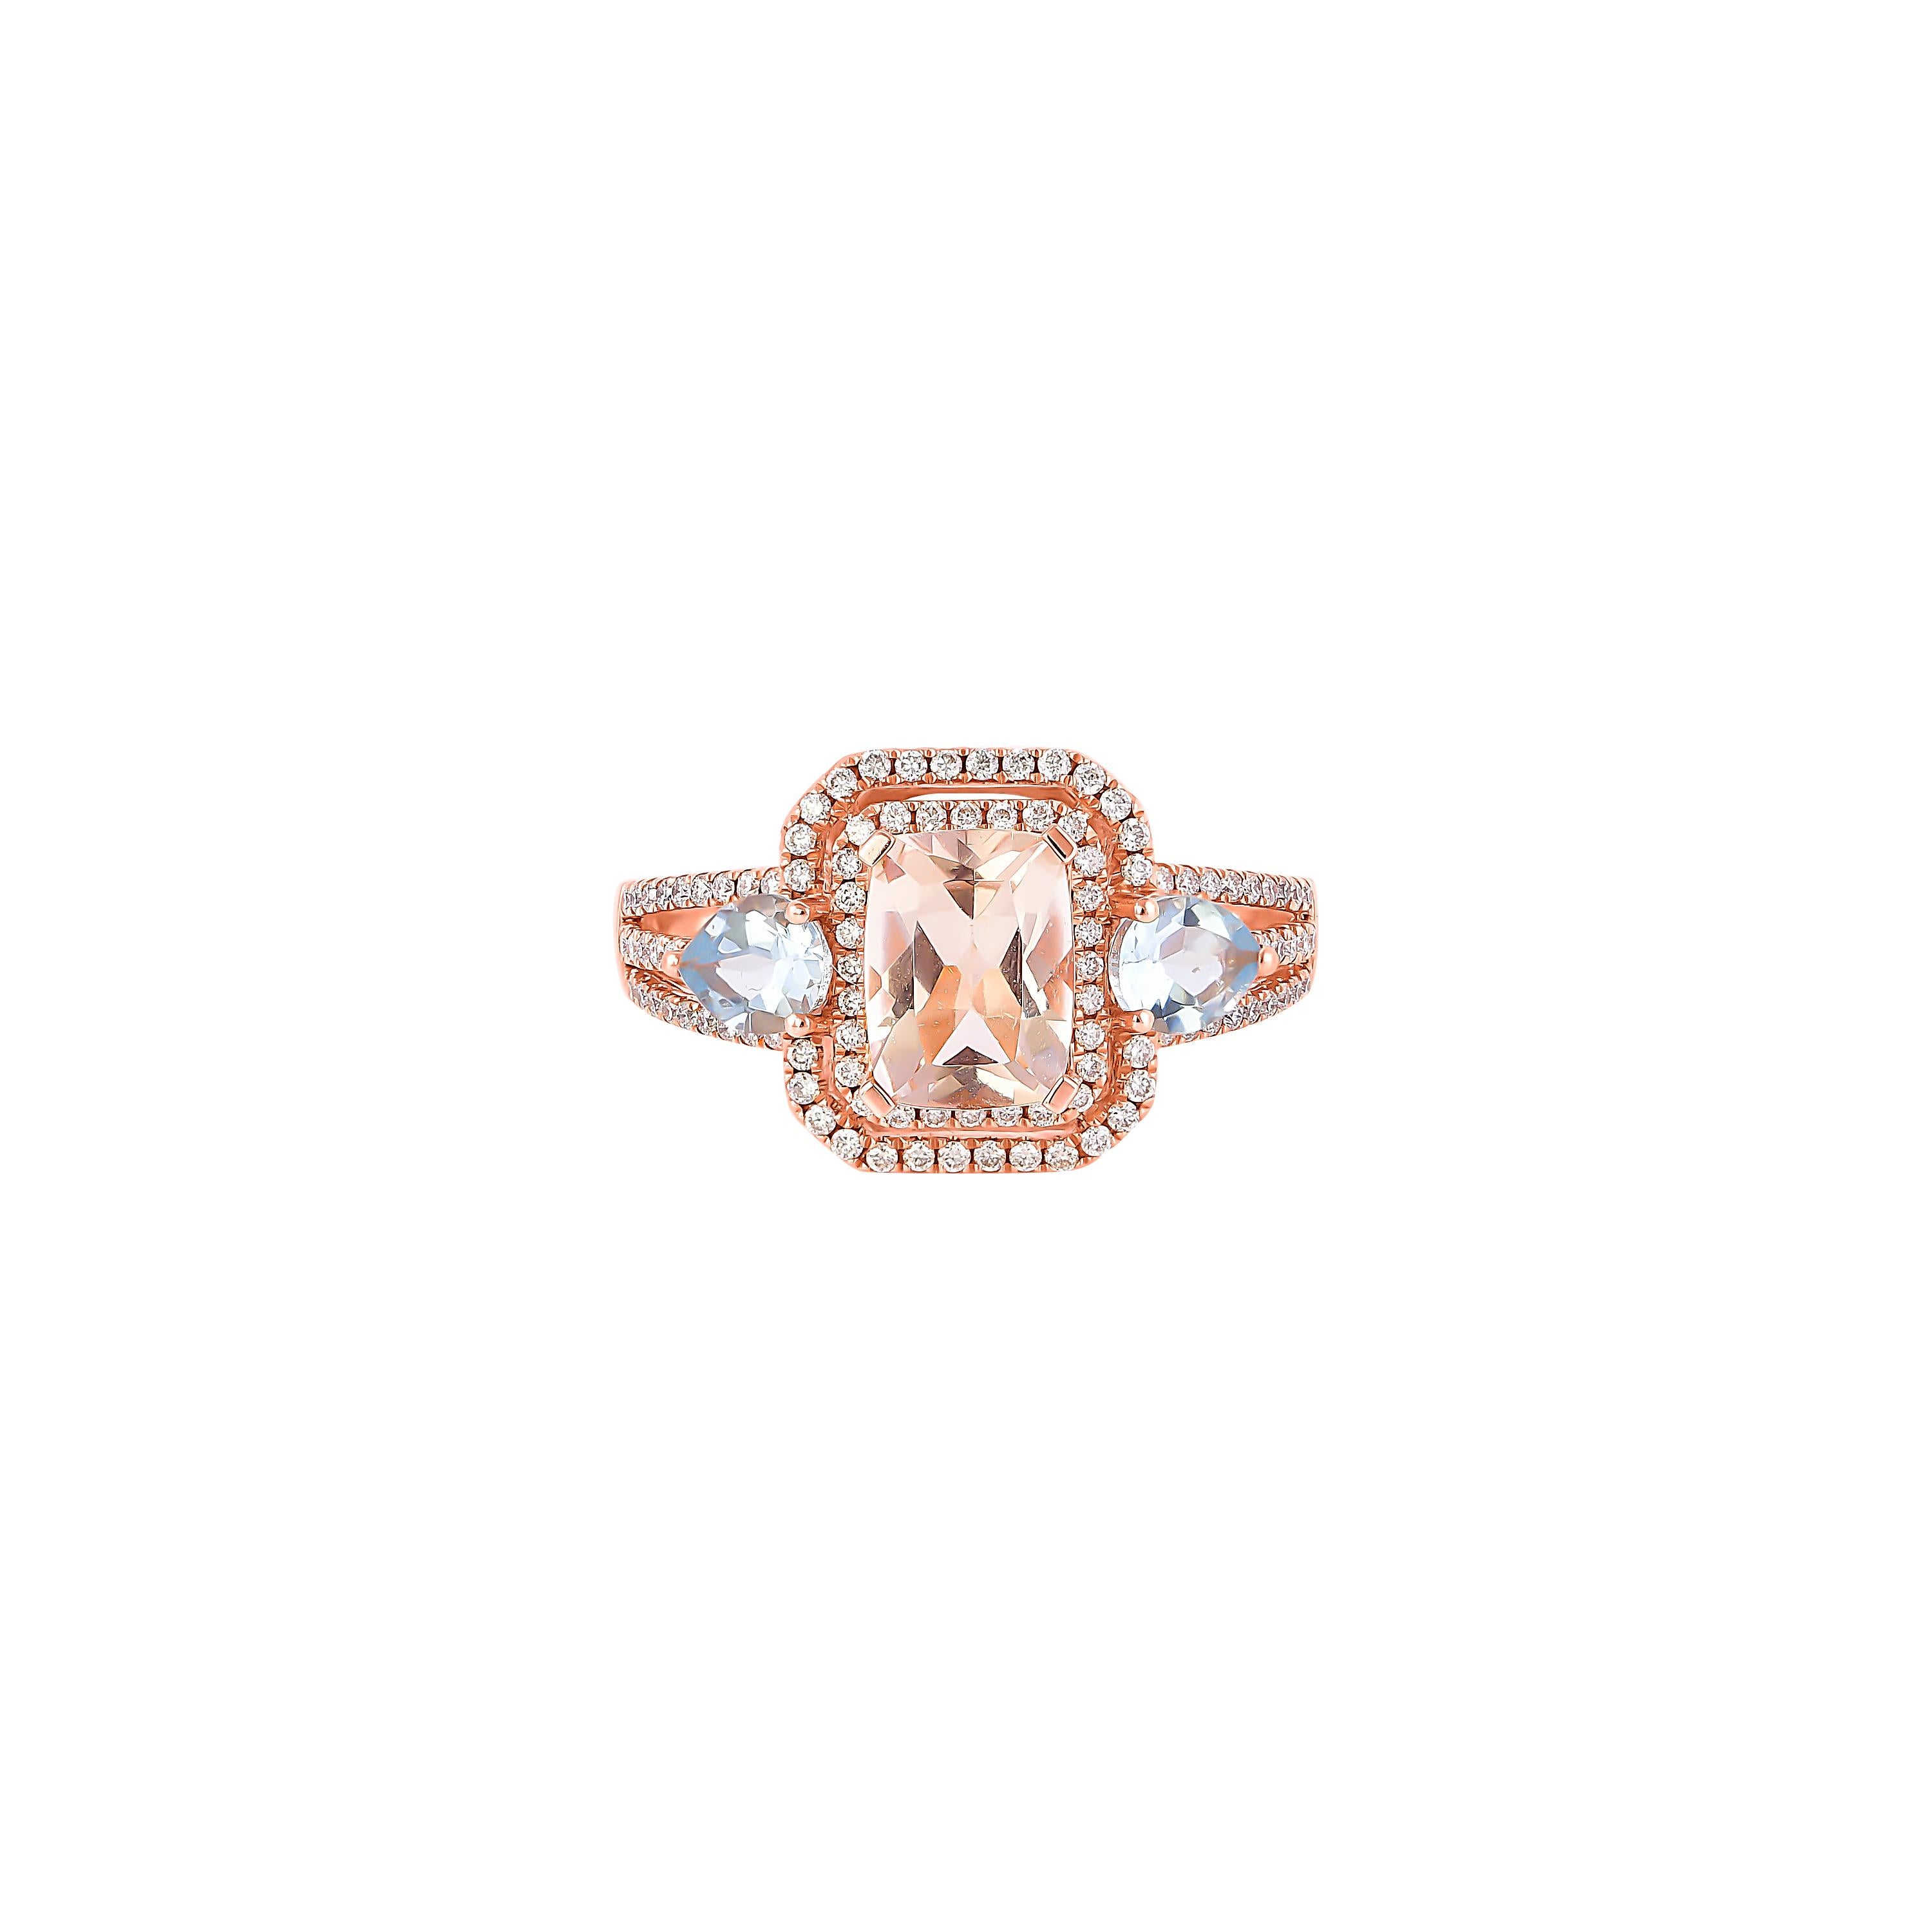 This collection features an array of magnificent morganites! The Morganite in the center is in classic Cushion Shape while the Aquamarine stone on either side is in Pear Shape. Accented with Diamonds these rings are made in rose gold and present a